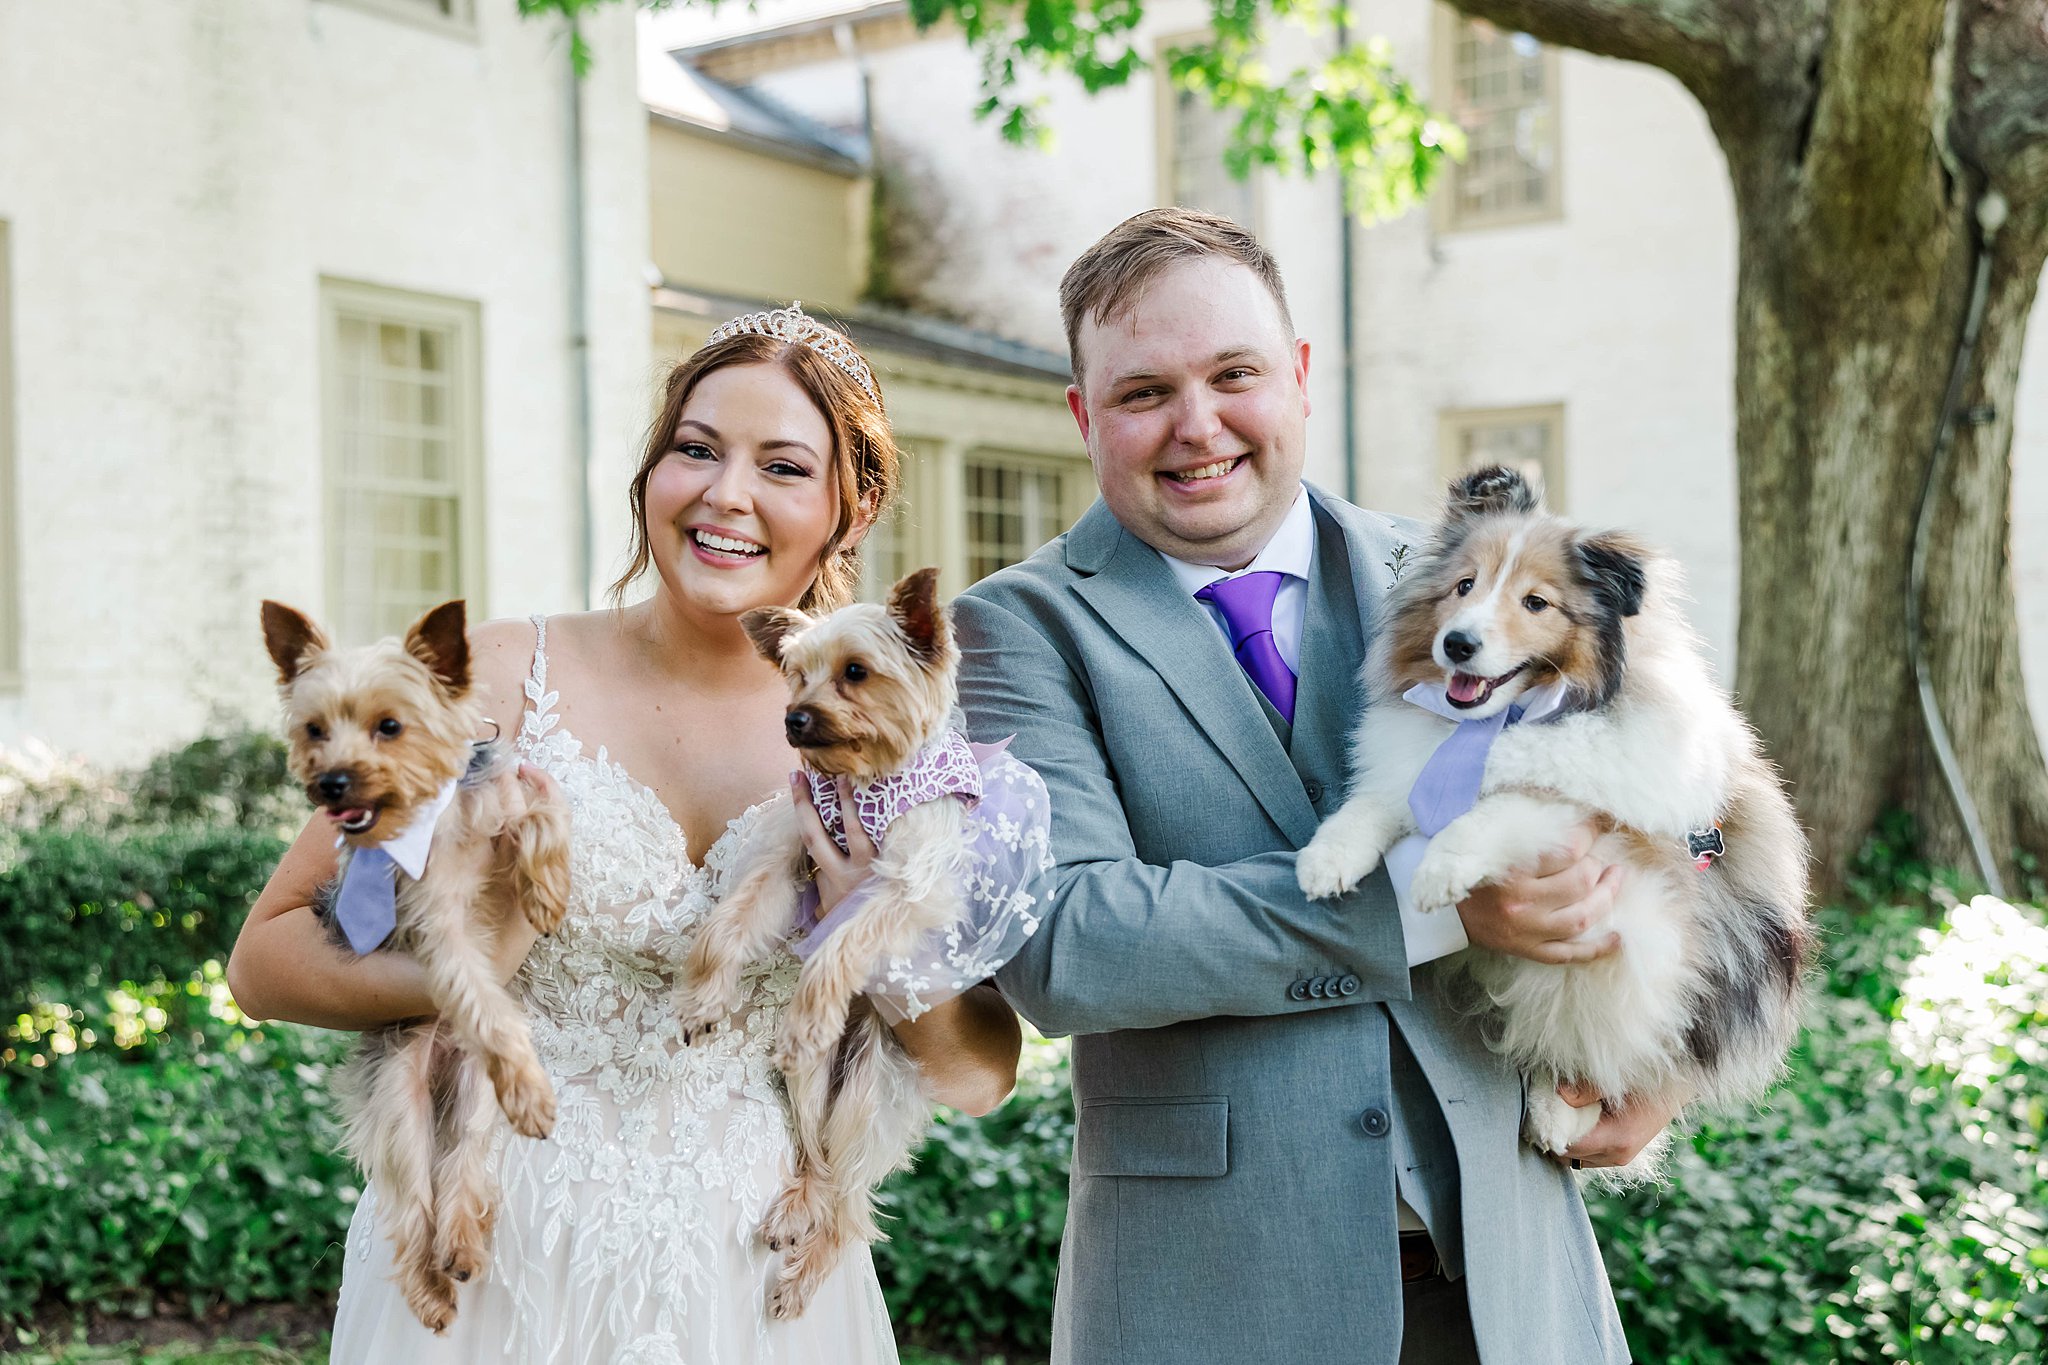 bride and groom with their three puppies (dogs) at their wedding